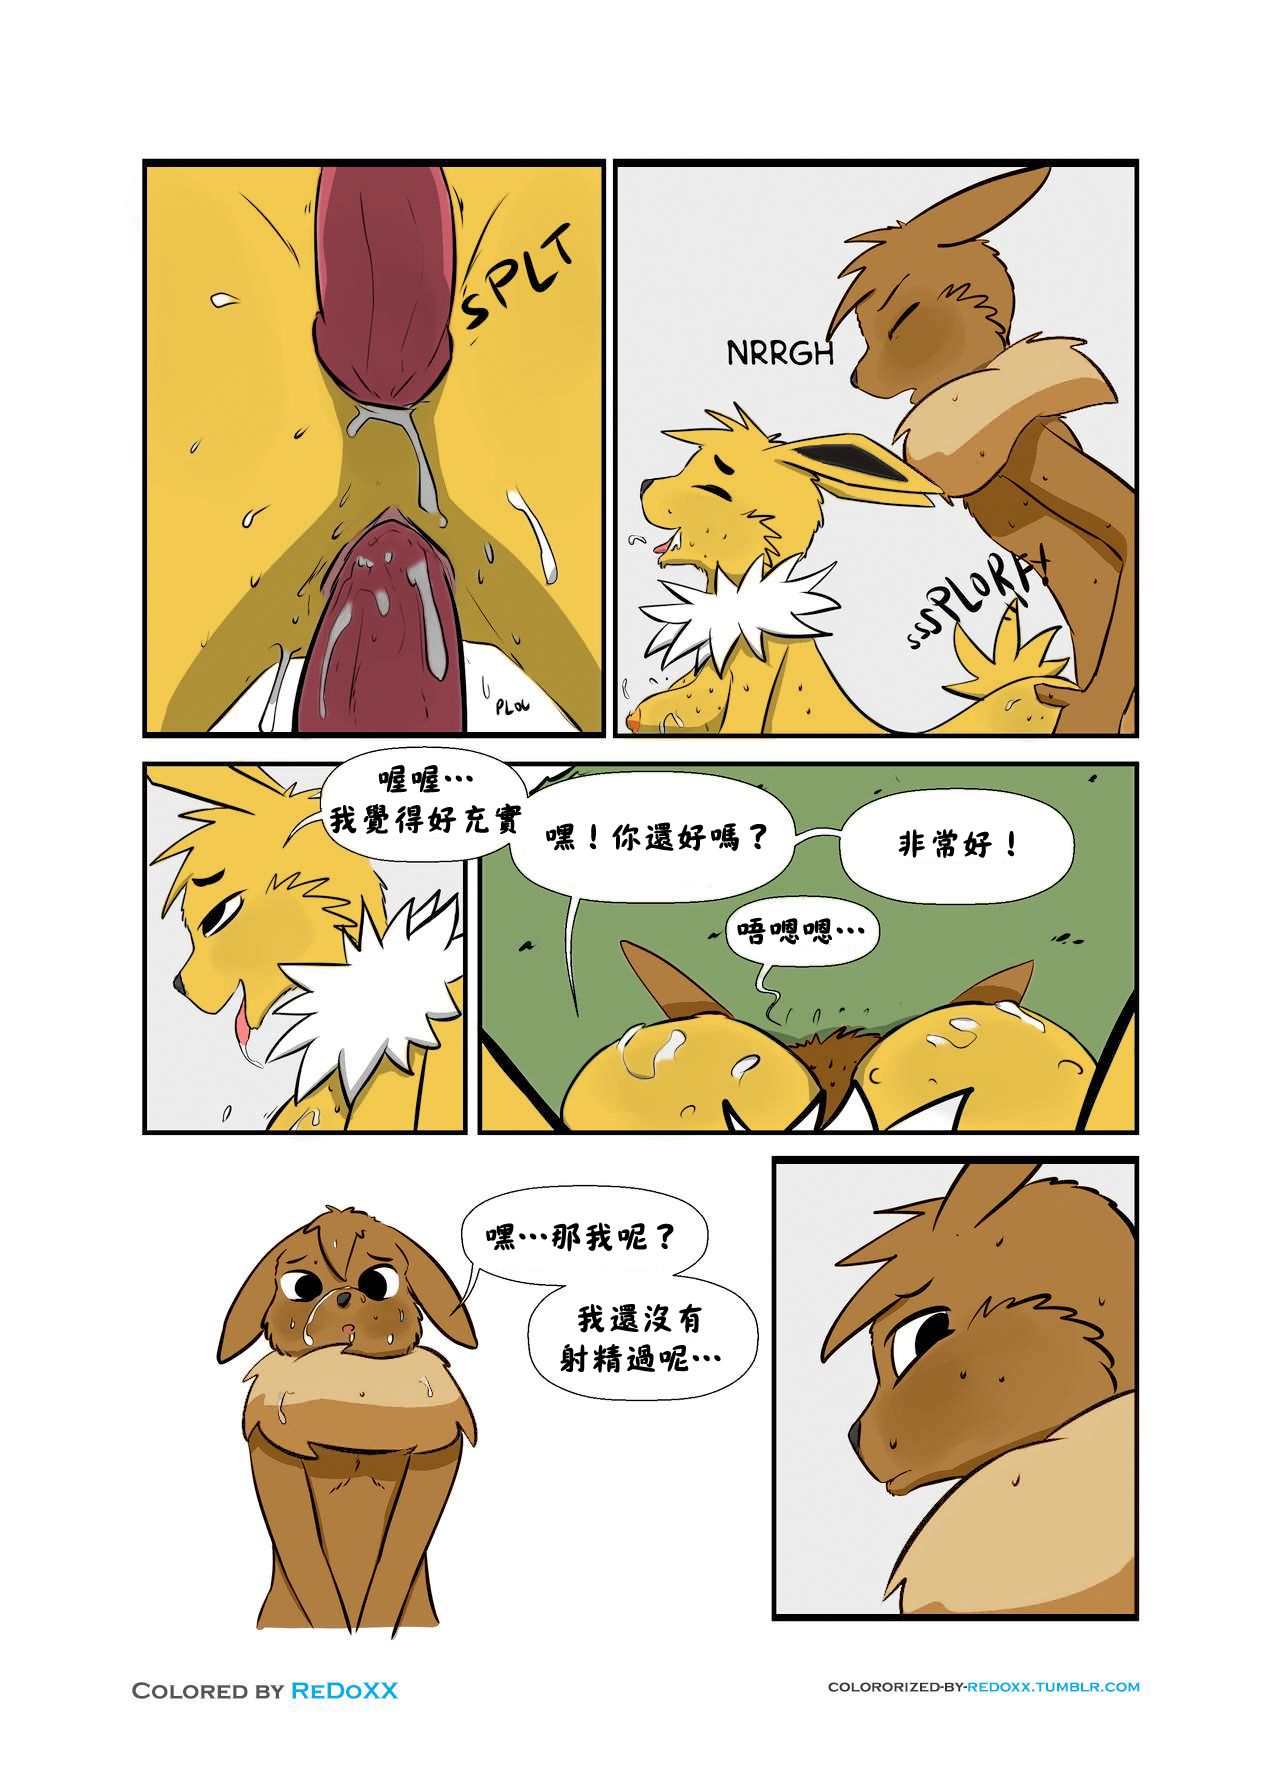 [Baaleze] Spyeon (Pokemon)(Colorized by ReDoXX) [Chinese] 